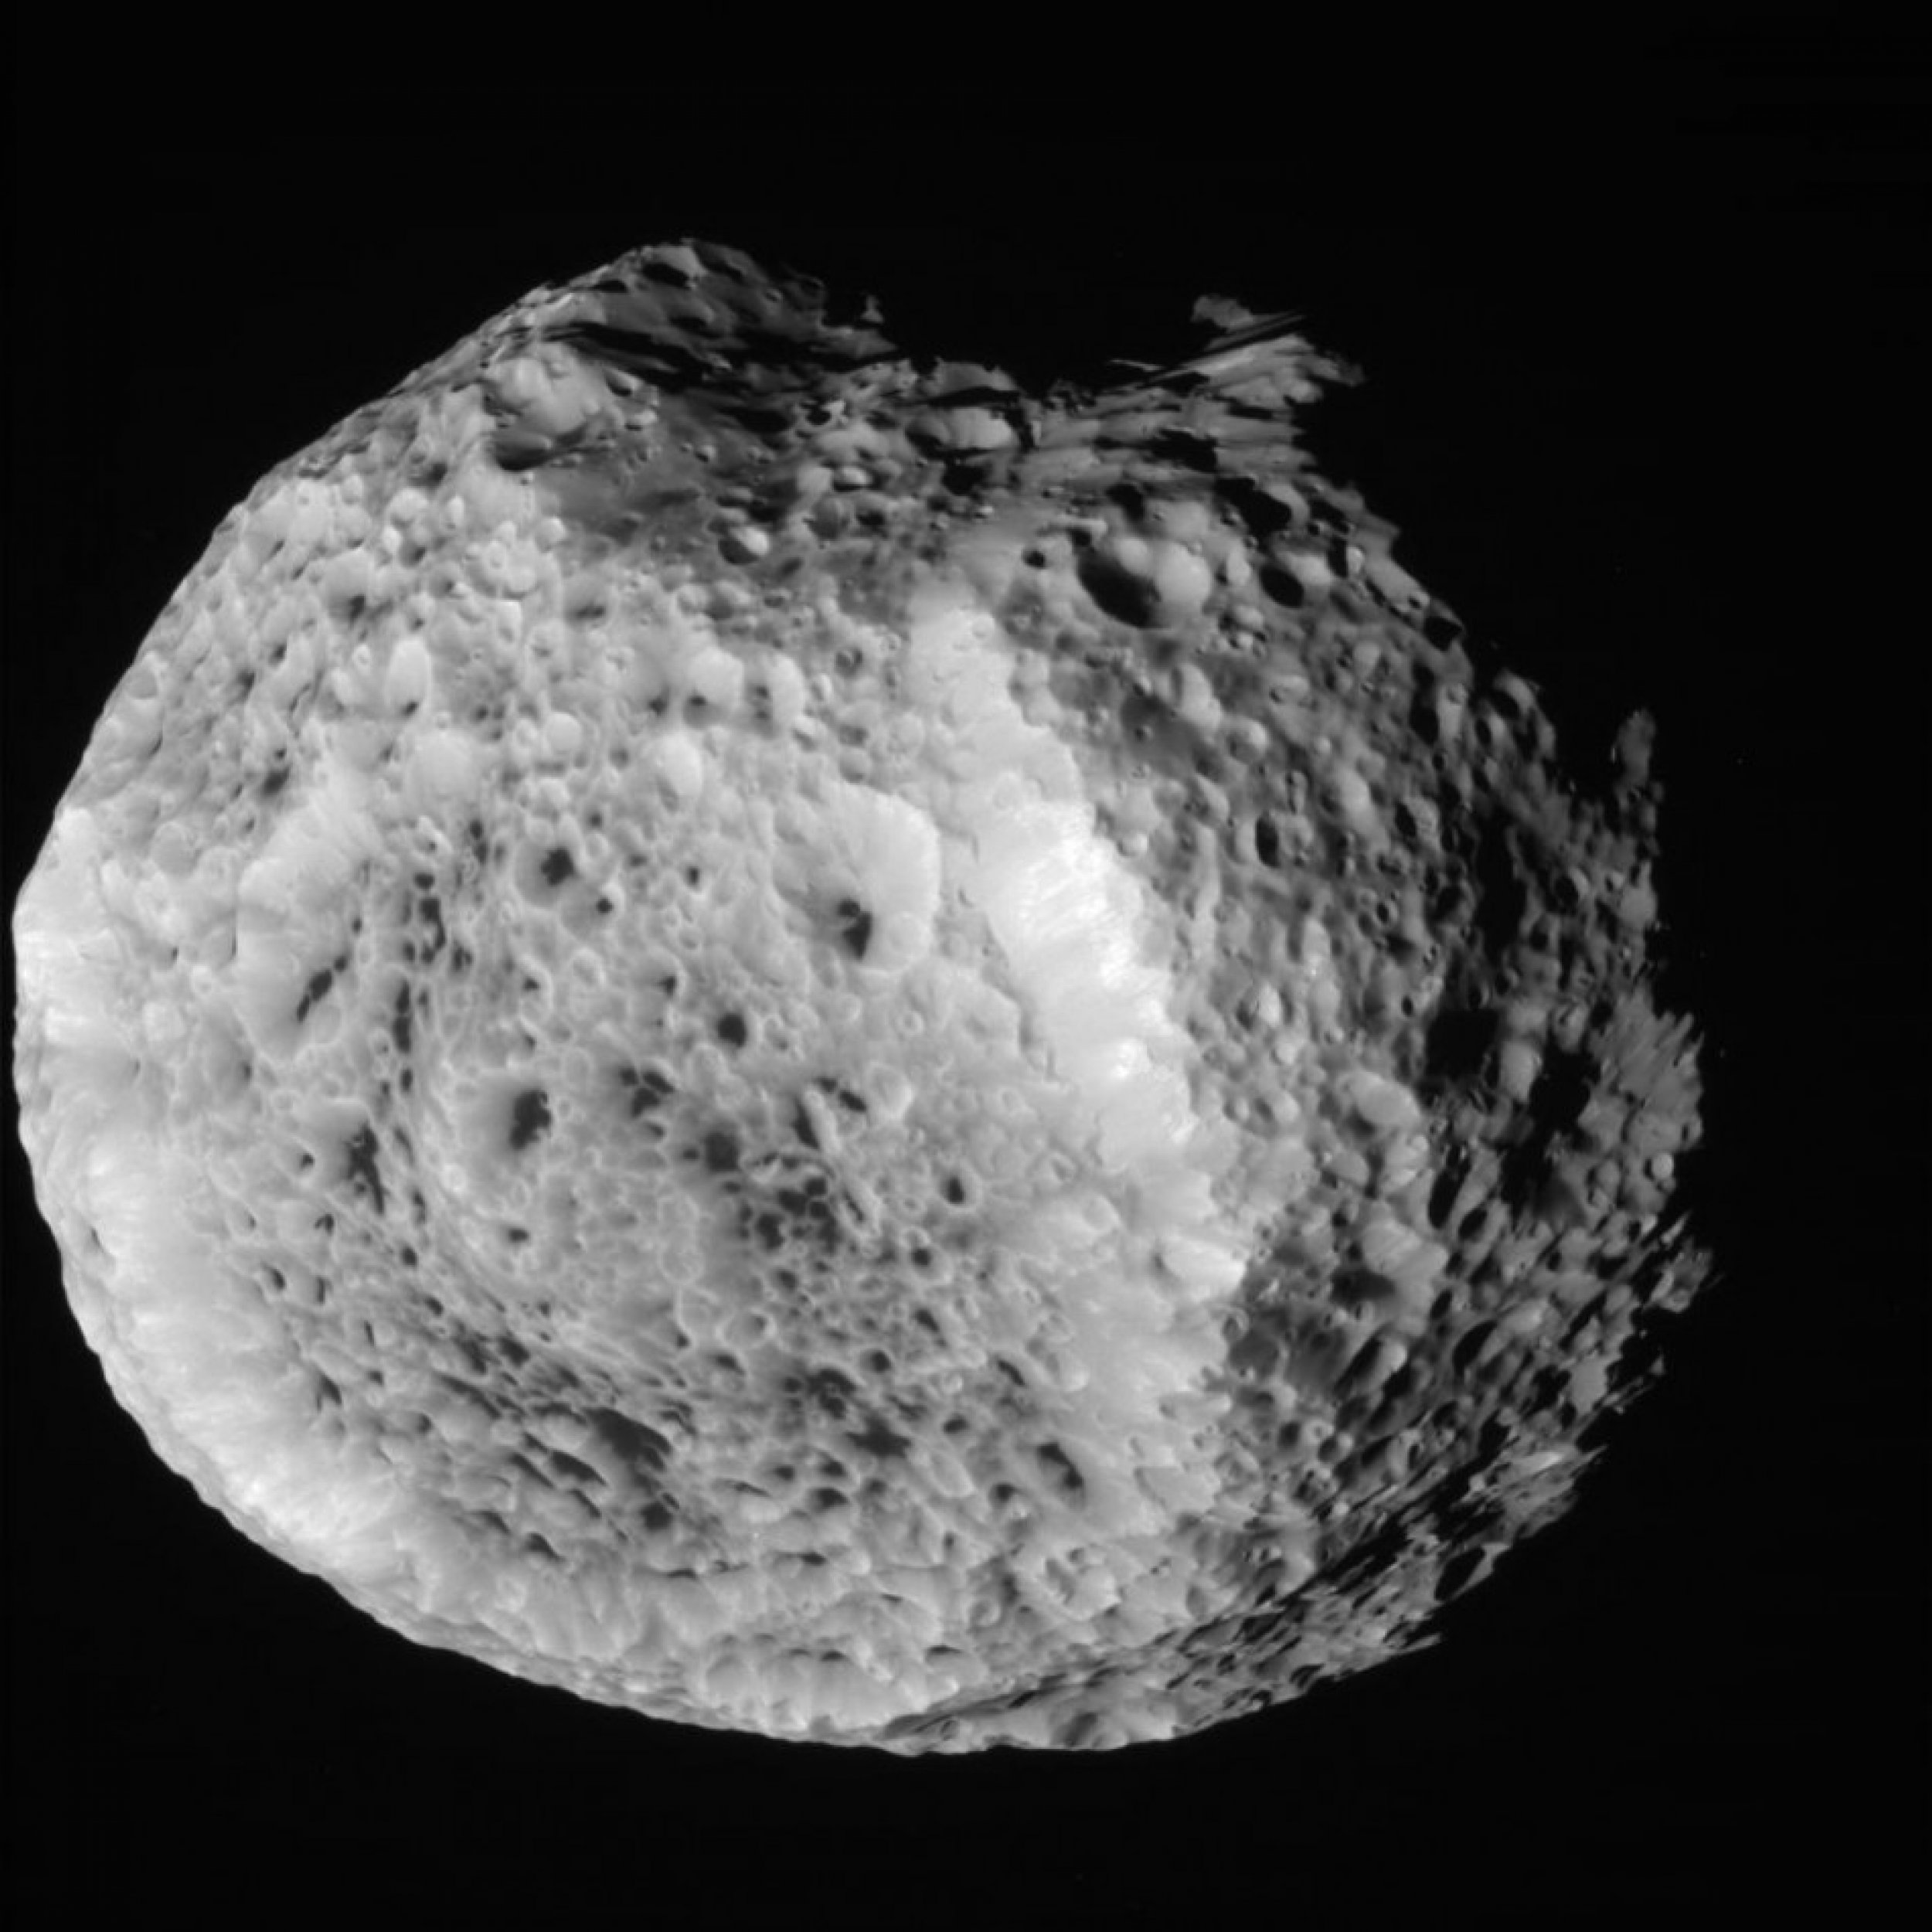 NASA Captures Spectacular Cosmic Images of Saturns Oddly Shaped Moon Hyperion.